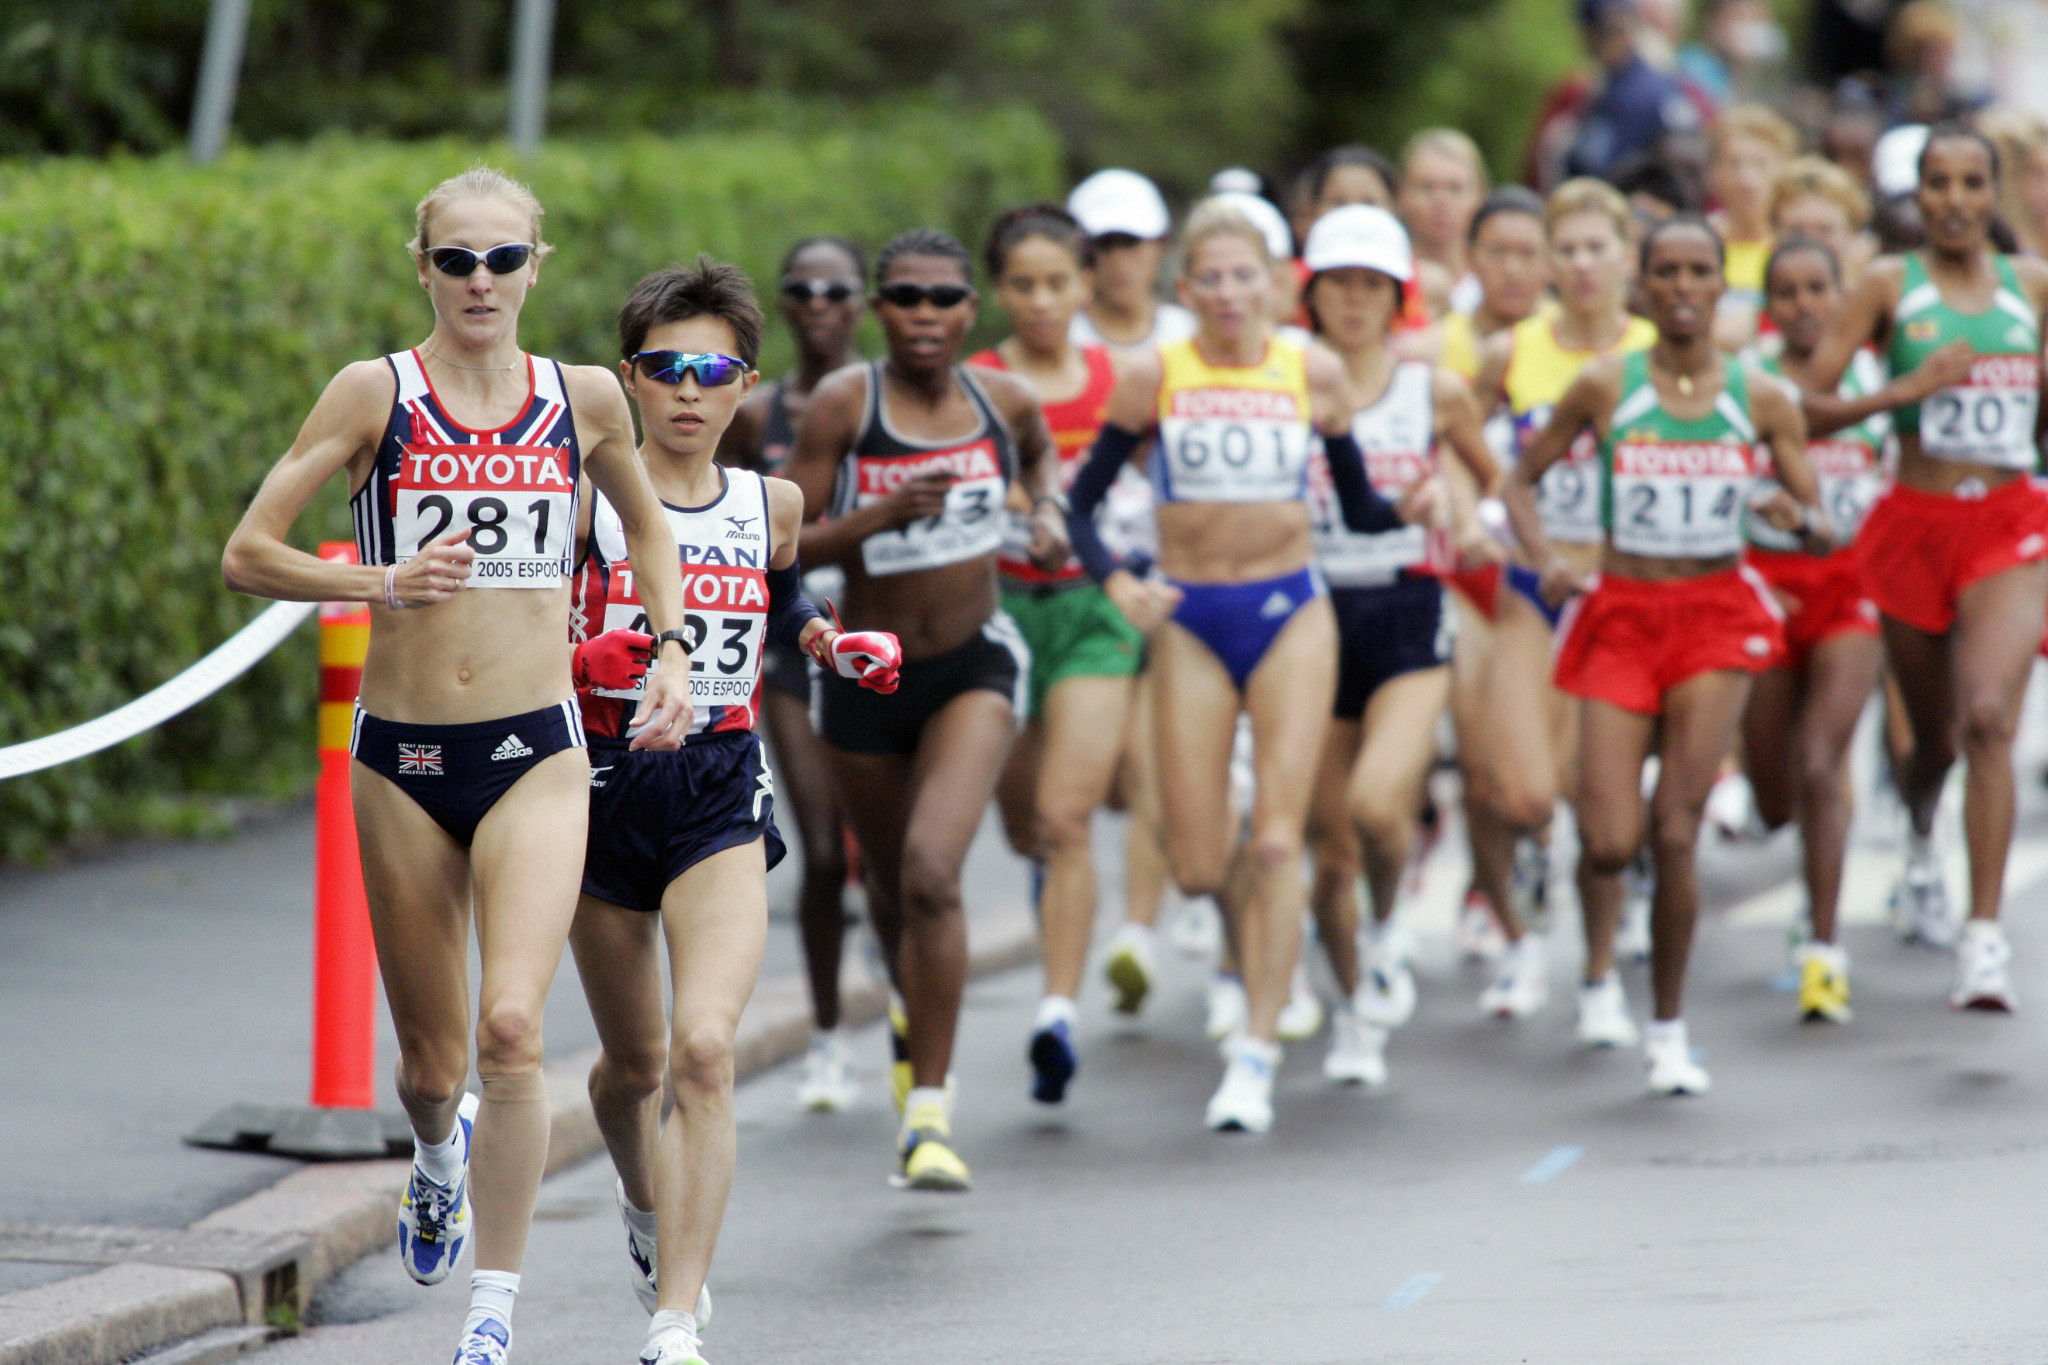 The IAAF World Championships women's marathon course record of 2:20:57 was set in 2005 by Britain's Paula Radcliffe in Helsinki when it was wet and cool in conditions ideal for running ©Getty Images